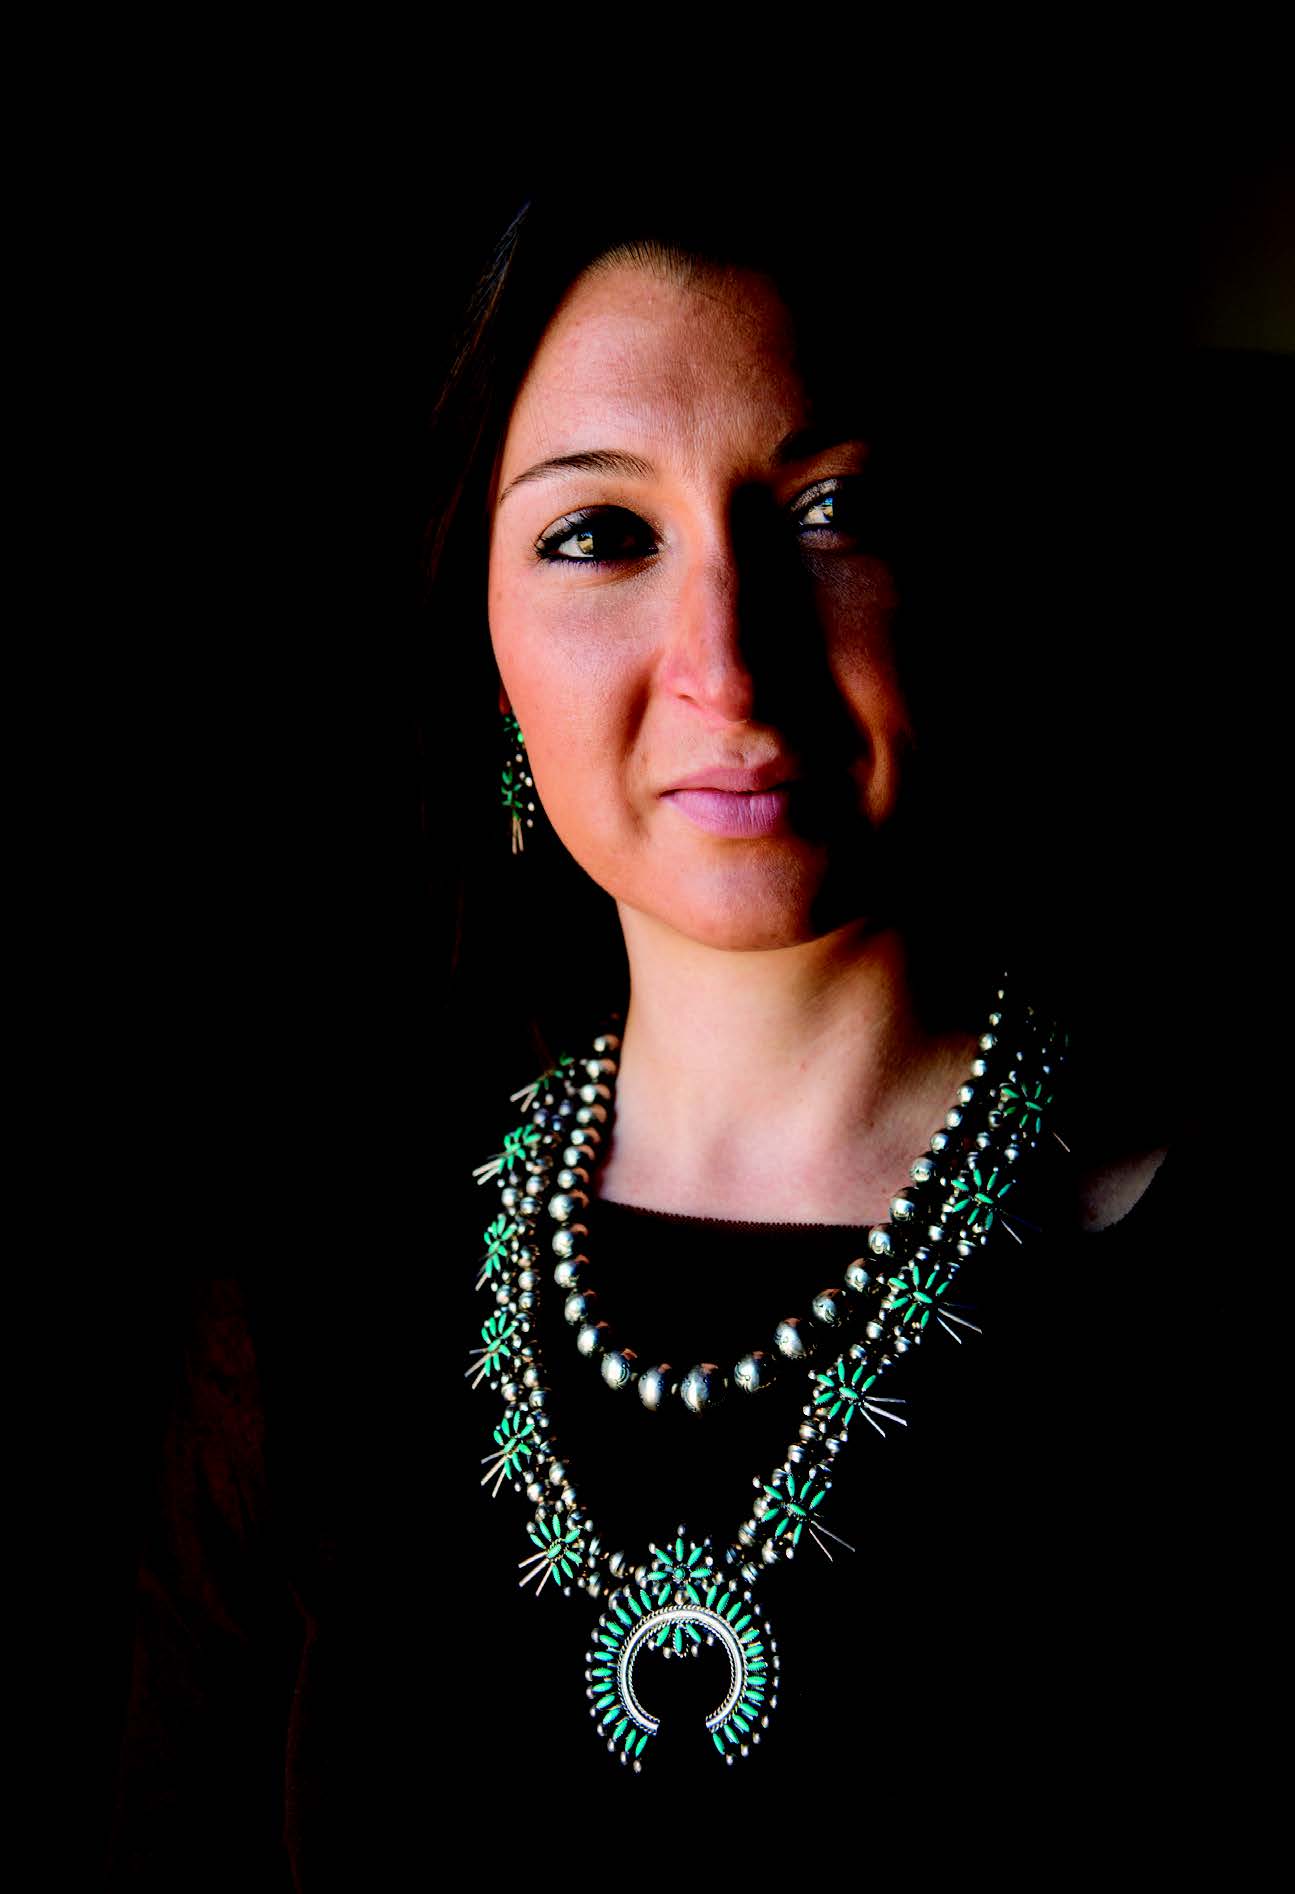 Helen Tindel, the author’s daughter, wearing Navajo silver beads and a Zuni needlepoint necklace and earring set, all from the collections of the Museum of Indian Arts and Culture. The Zuni set is on view at the museum in Turquoise, Water, Sky: The Stone and Its Meaning. Photograph by Kitty Leaken.